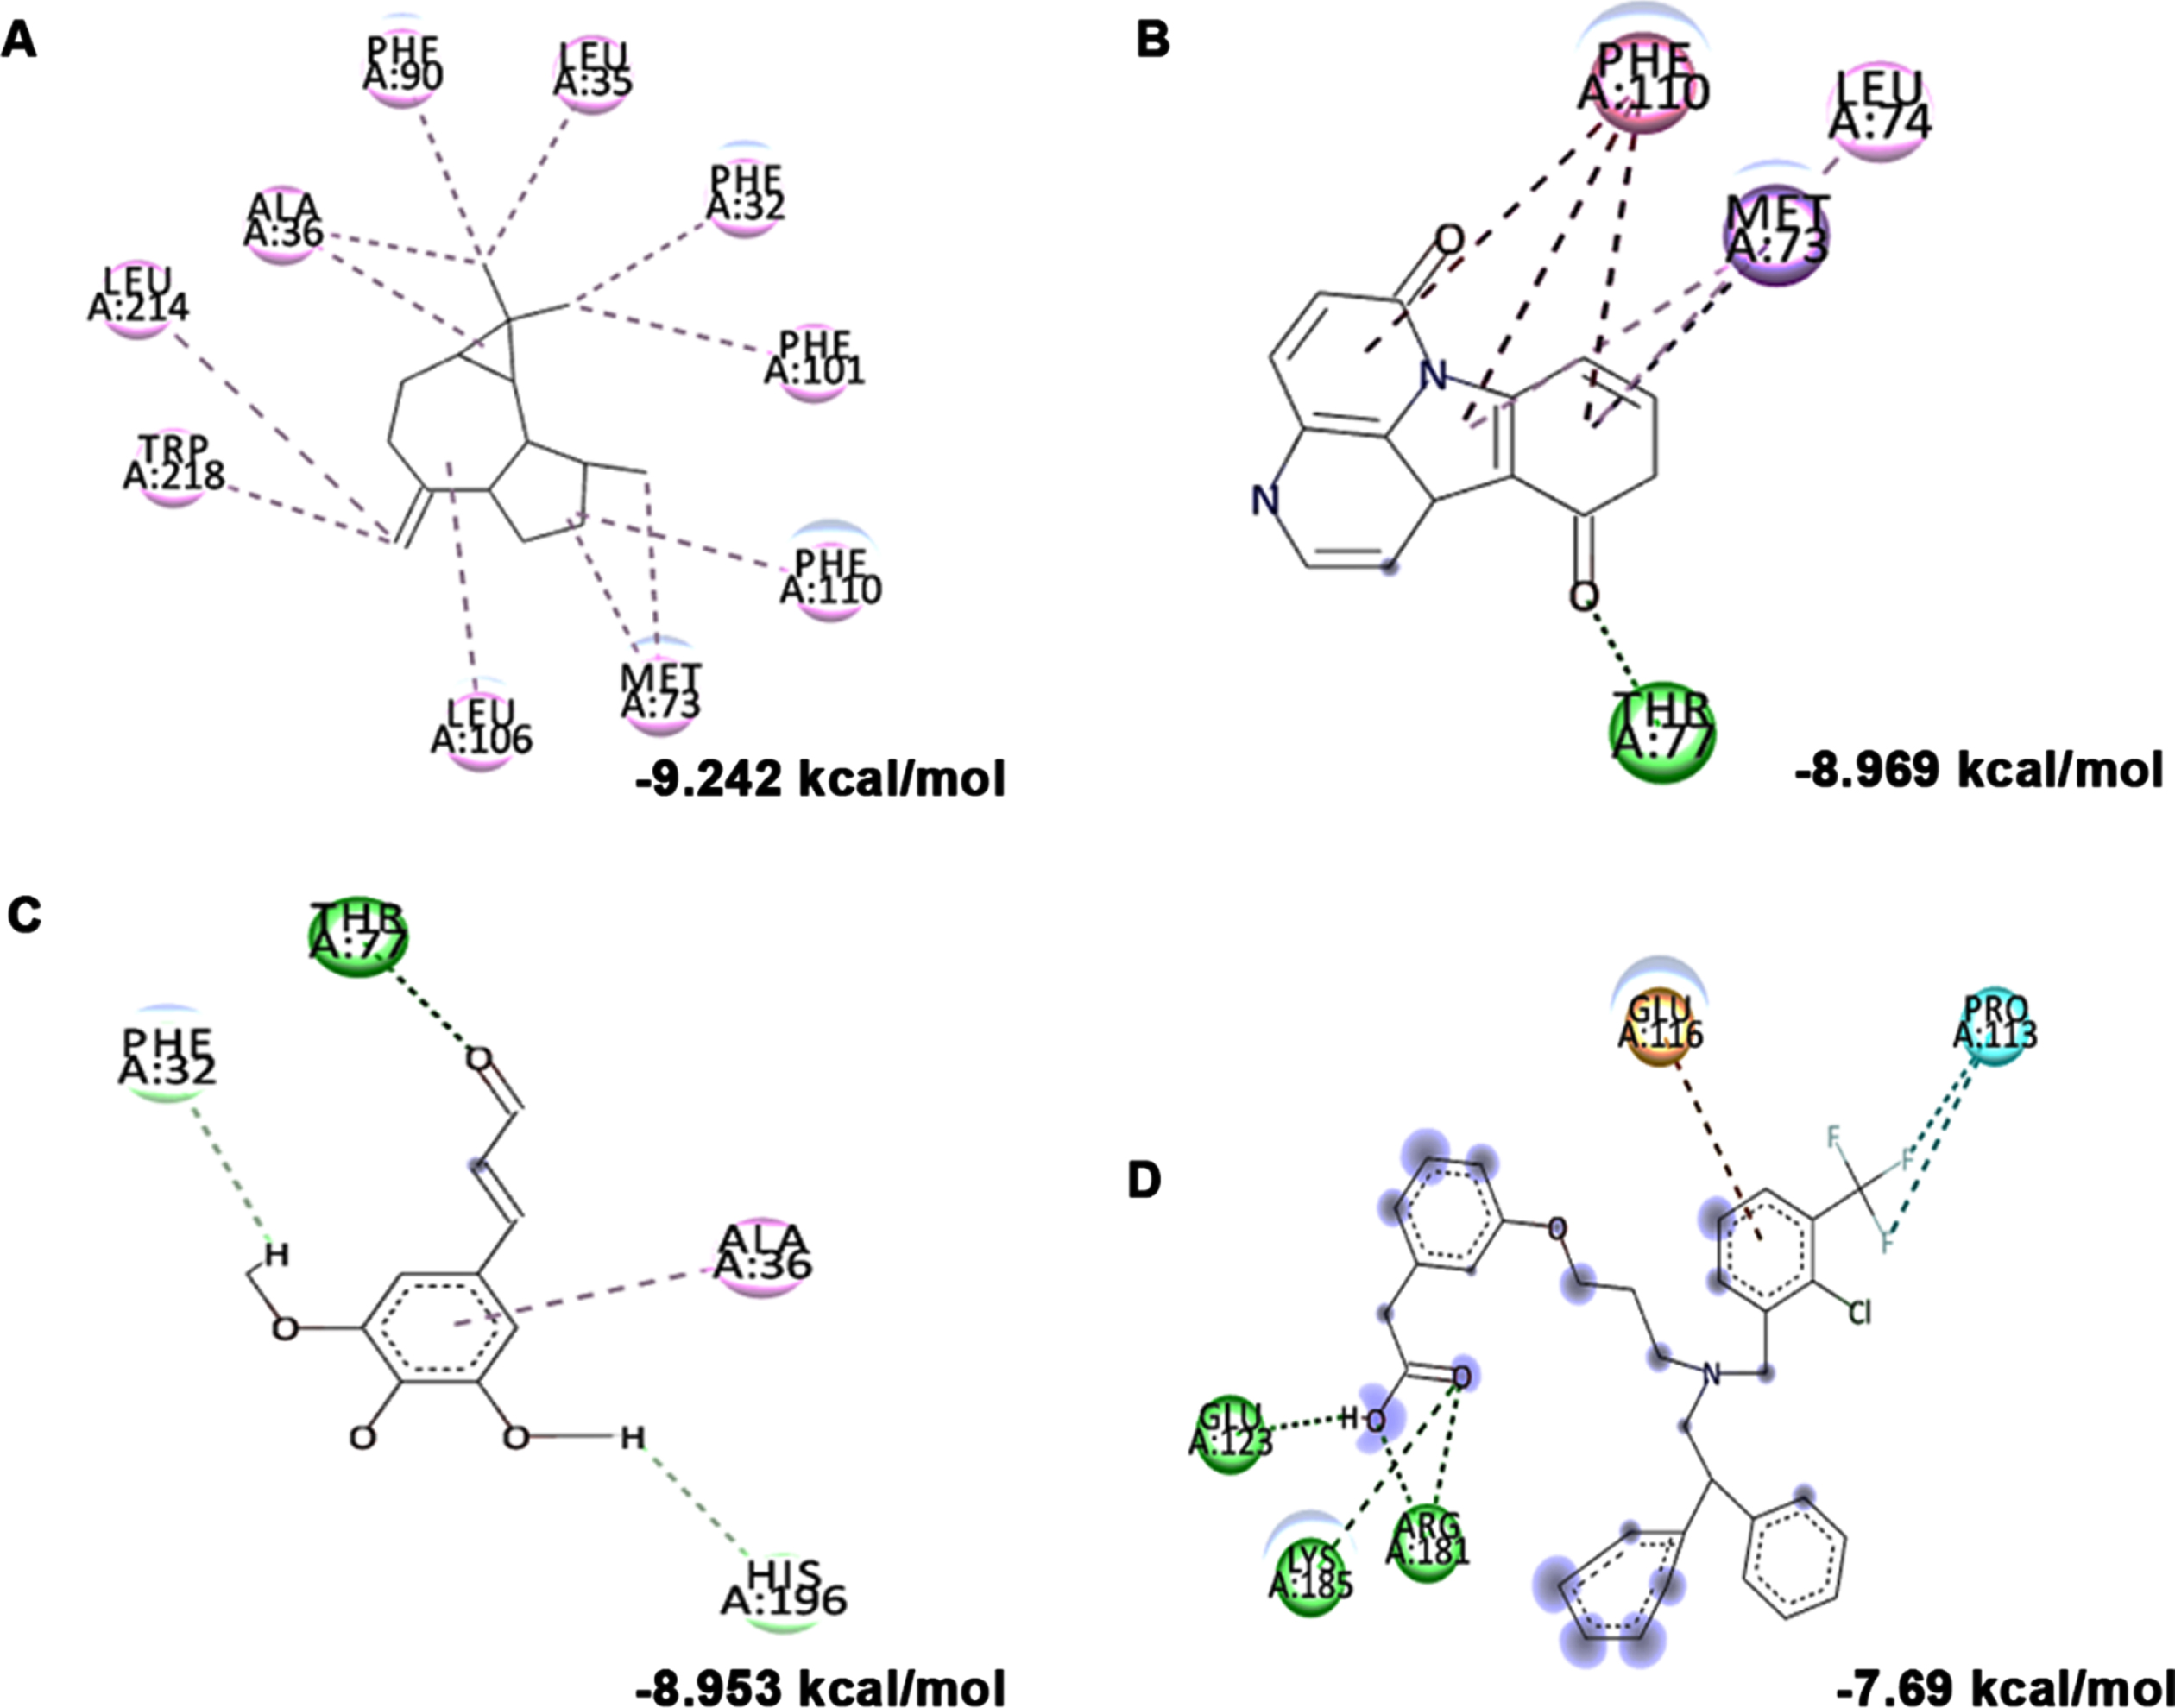 Molecular docking and mode of interaction of compounds (top 3 hits) from HS extract against LXR-α (A) allo-Aromadendrene (B) 11-Hydroxycanthin-6-one (C) Sinapoyl aldehyde (D) GW3965 (Green indicates hydrogen bond, purple represents alkyl bond, pink represent π-alkyl bond)